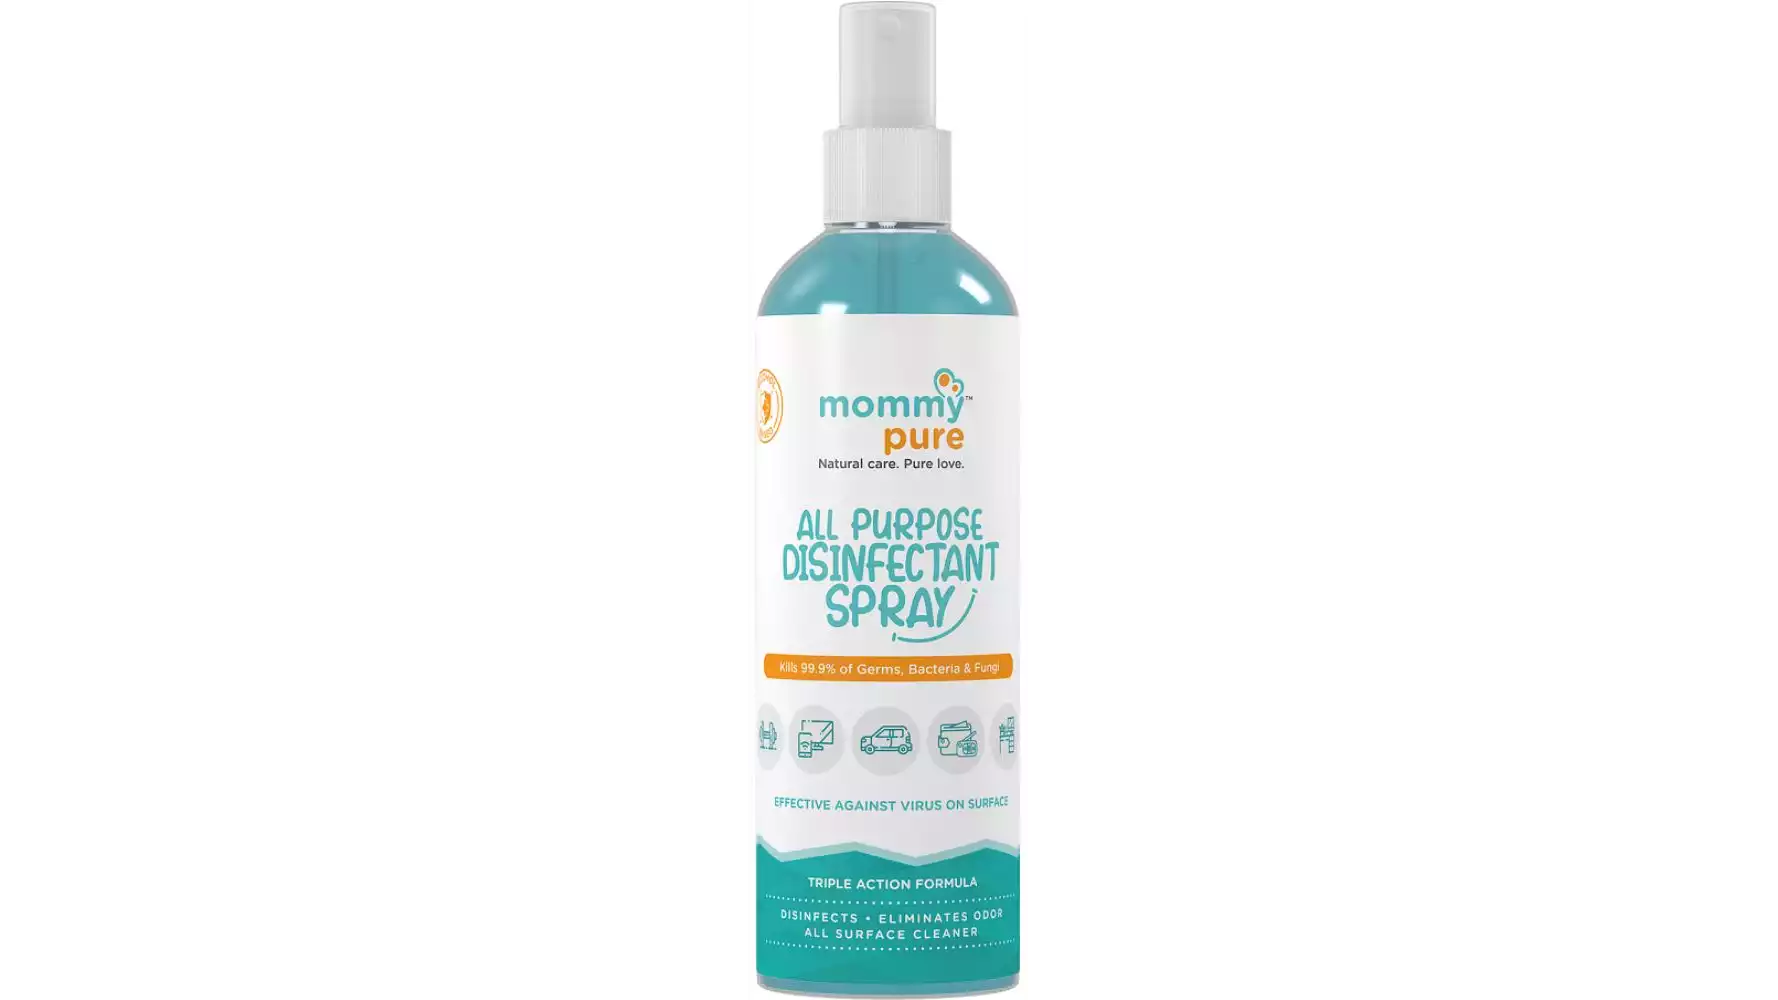 Mommypure All Purpose Disinfectant Spray (100ml, Pack of 2)